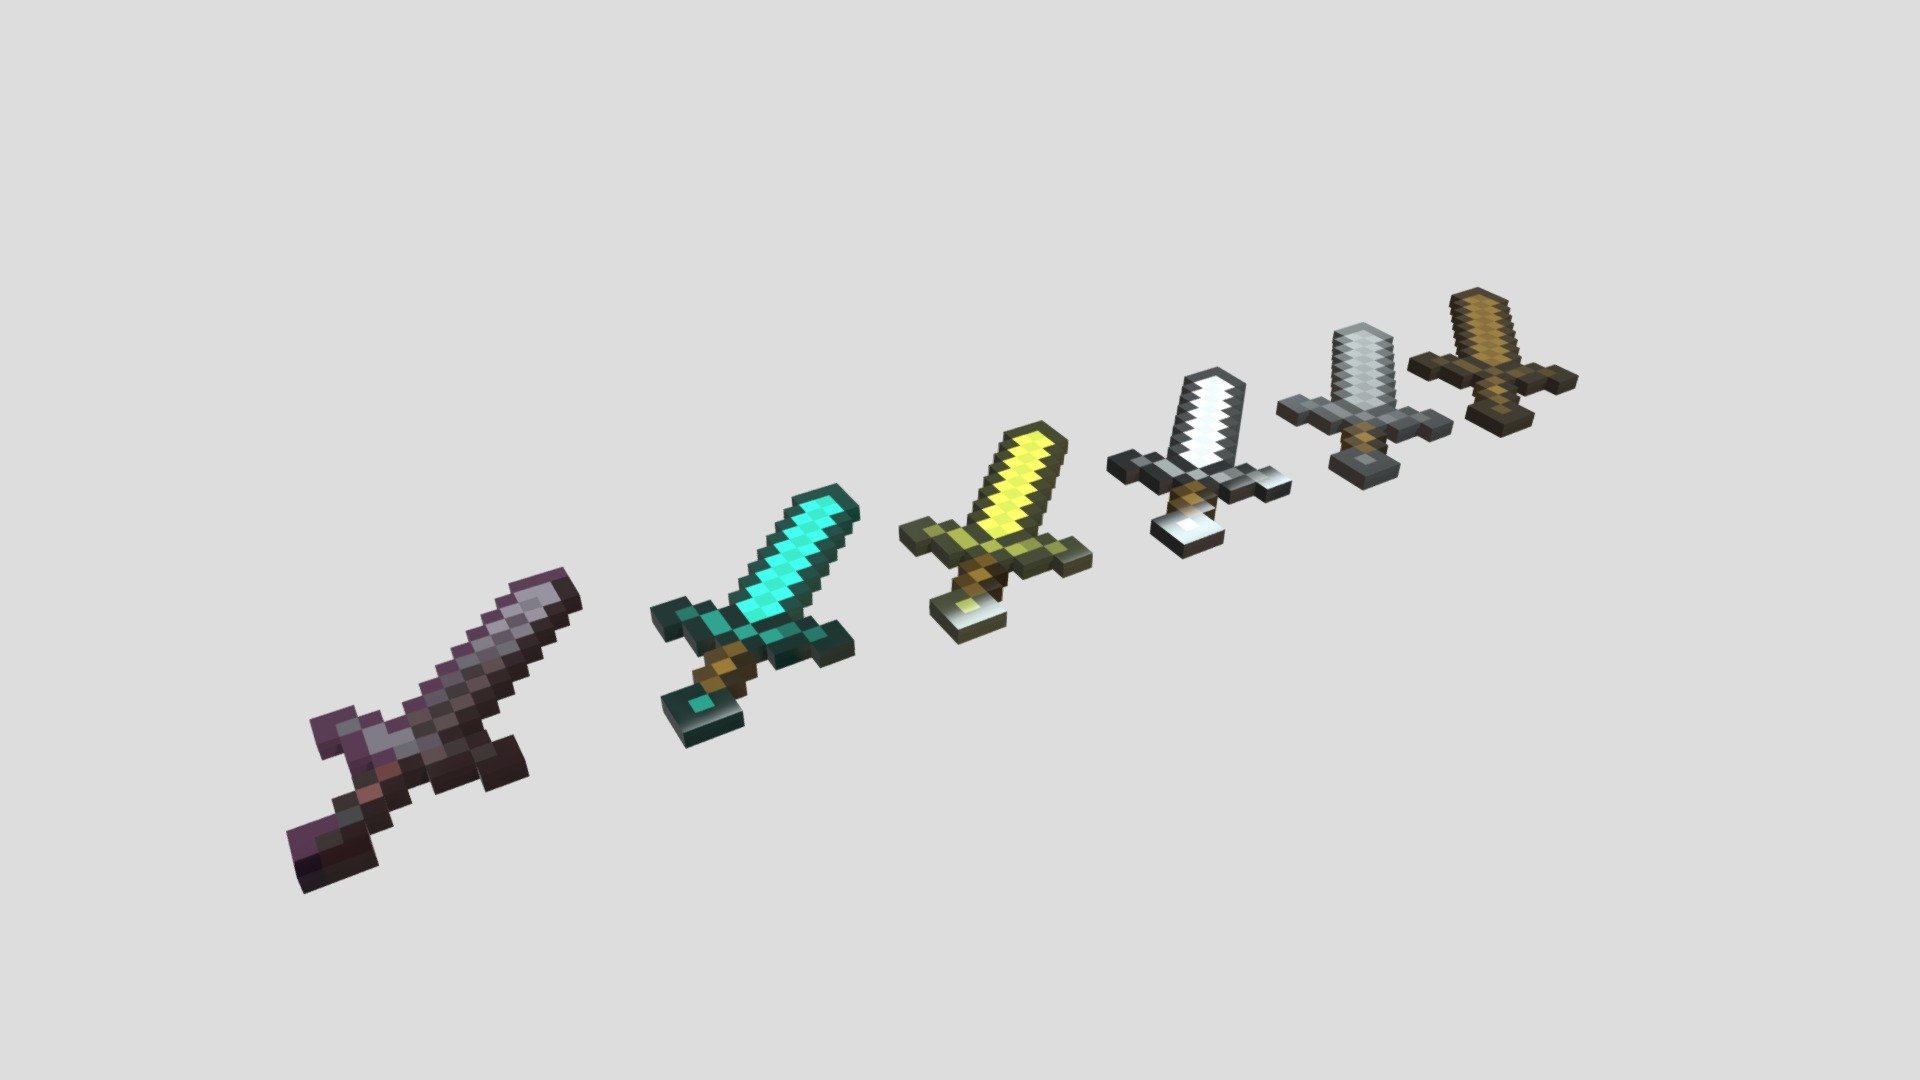 Minecraft Swords_Updated - 3D model by ShadowBubbles [bd914f4] - Sketchfab